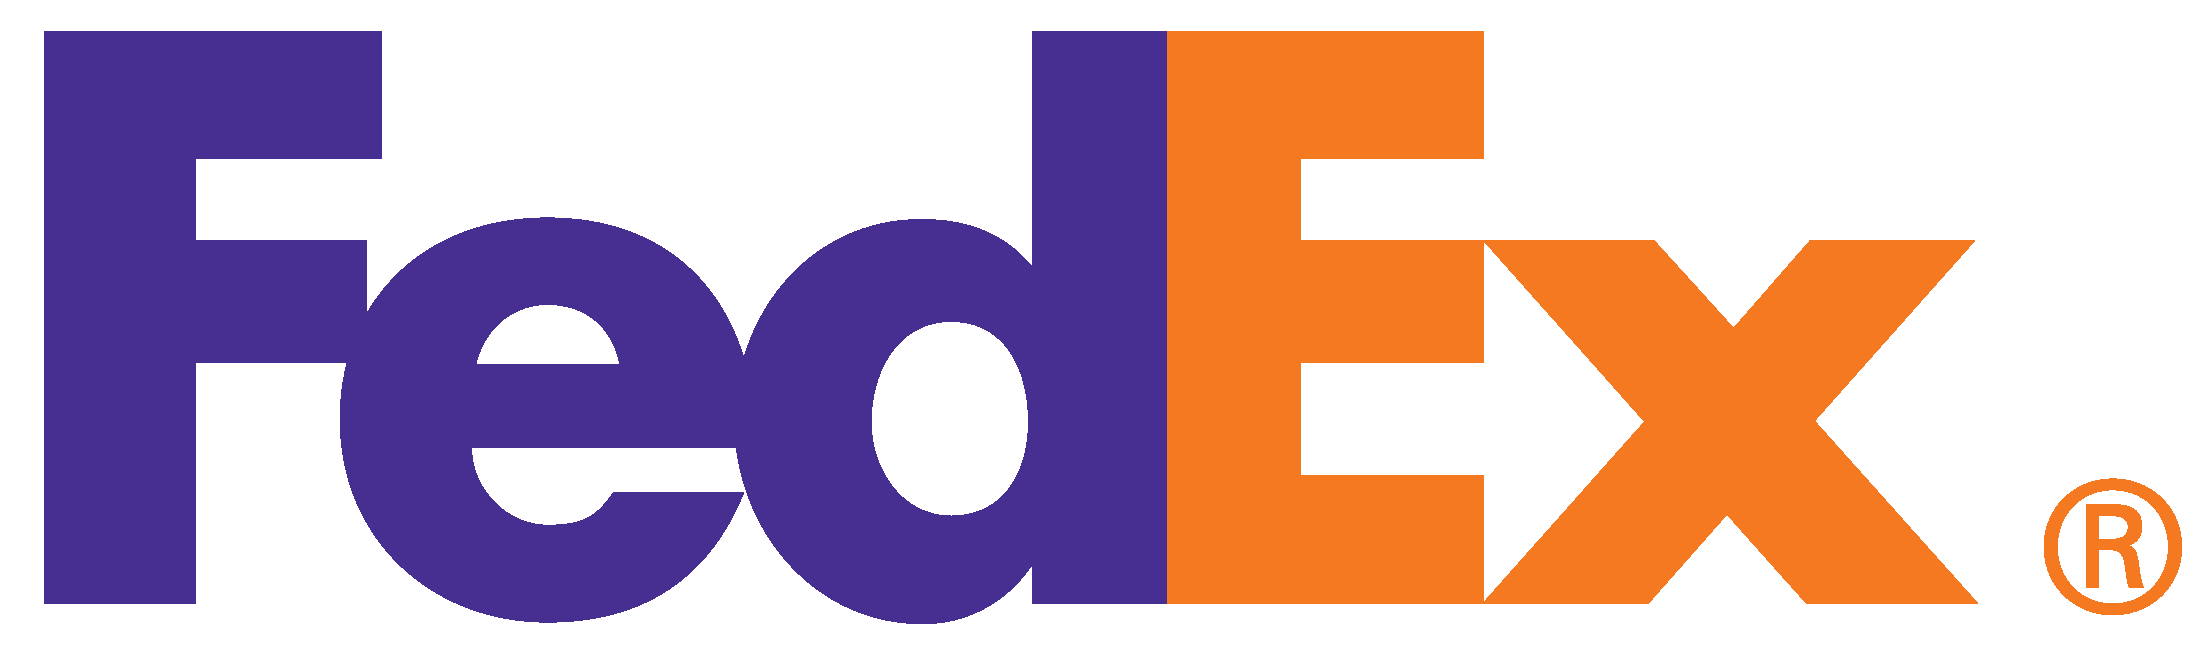 Customer Experience at FedEx